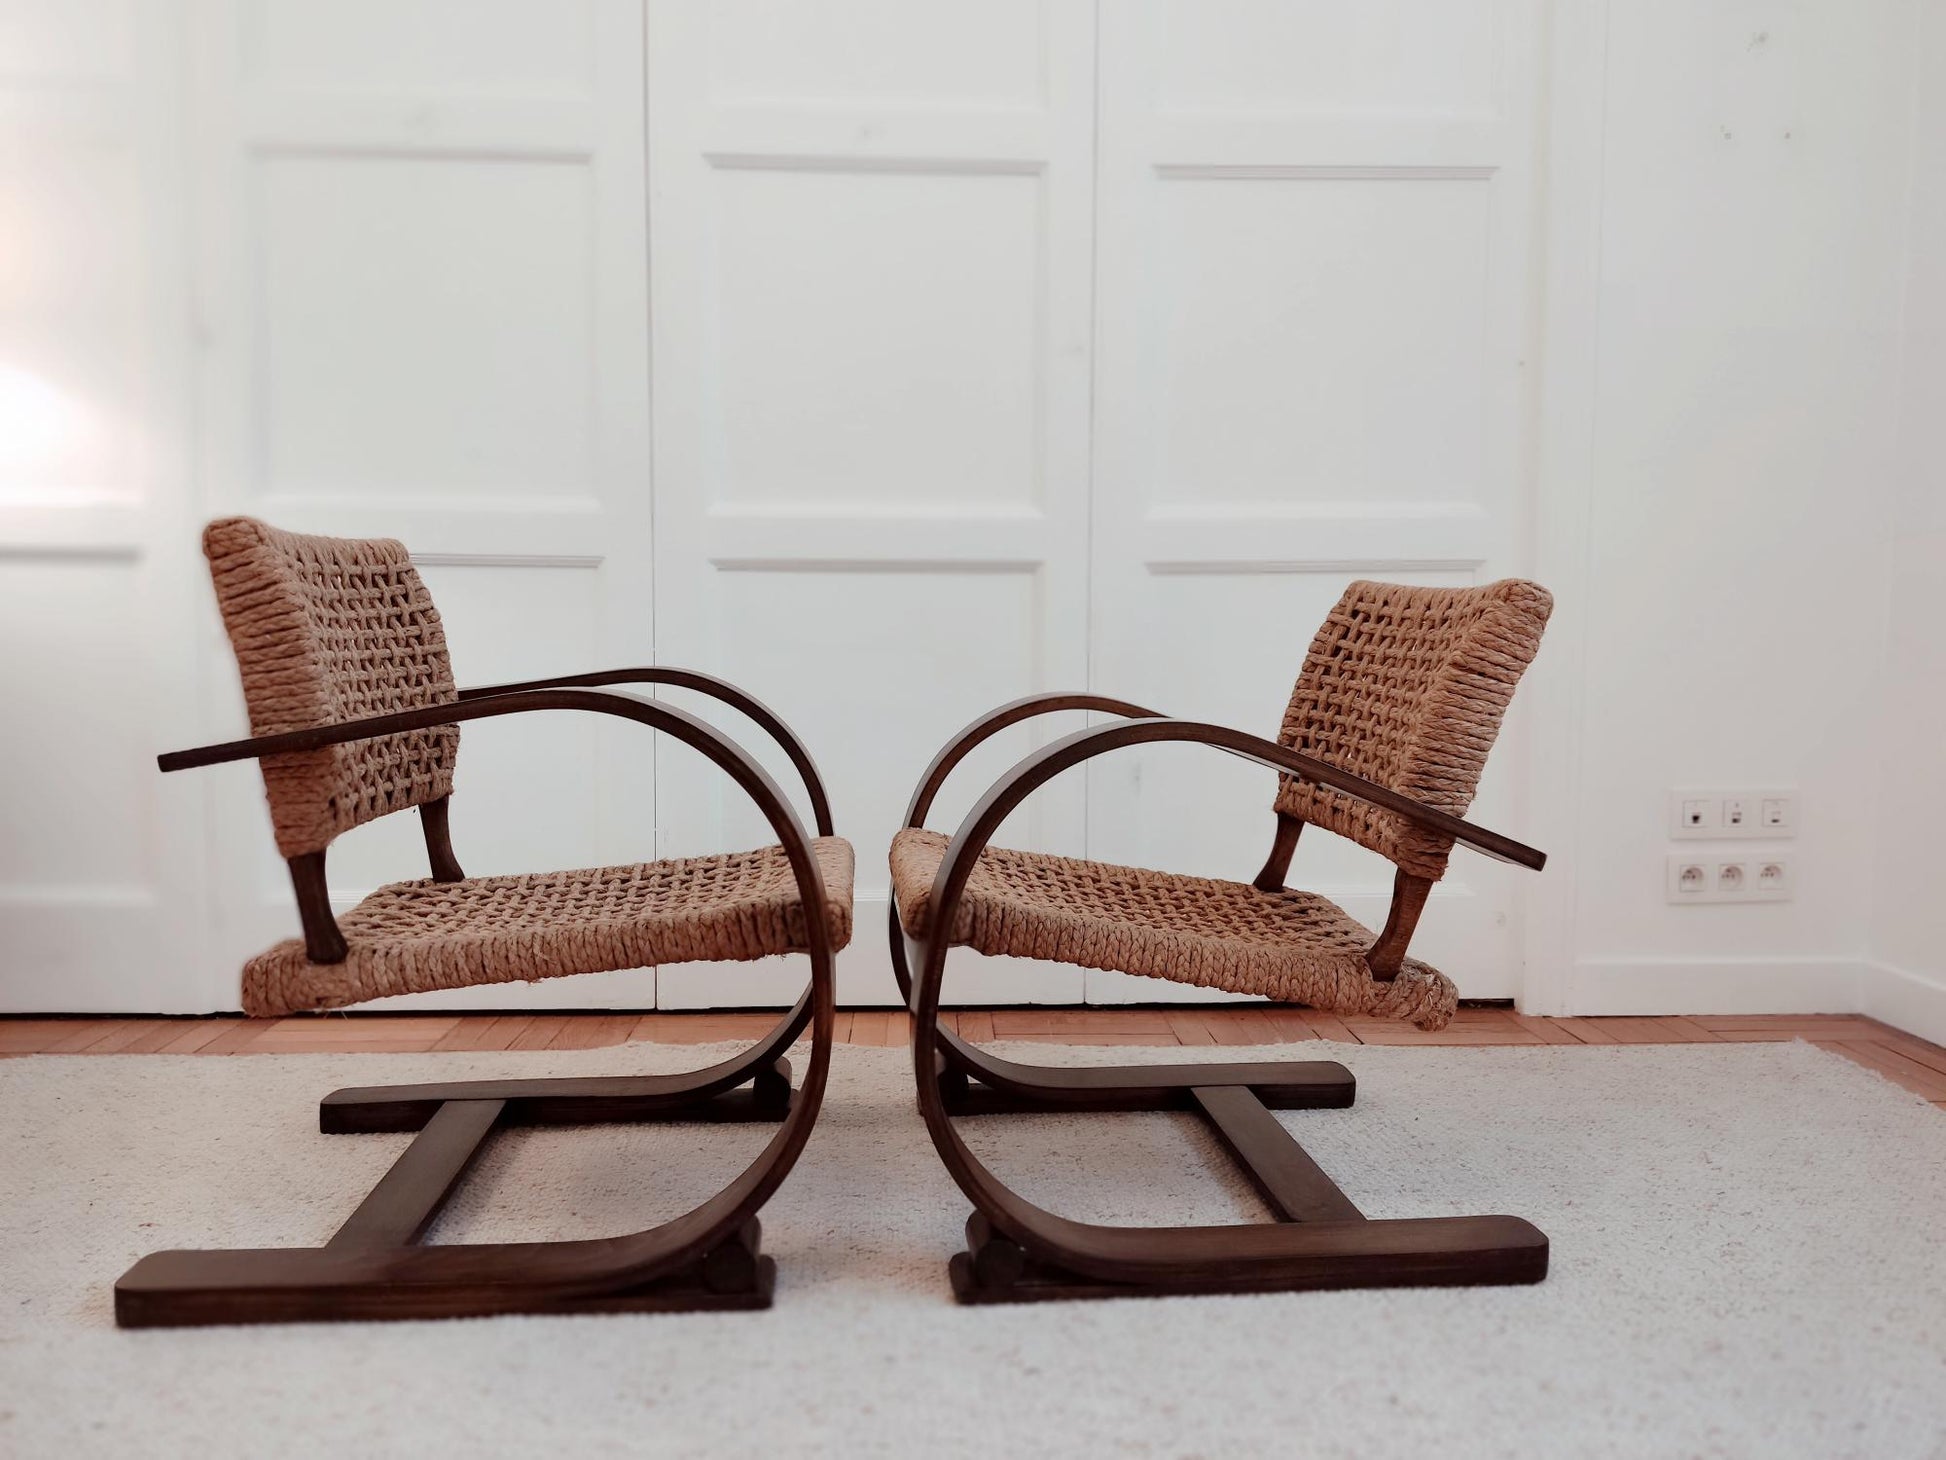 Audoux & Minet Rope Chairs Chairs